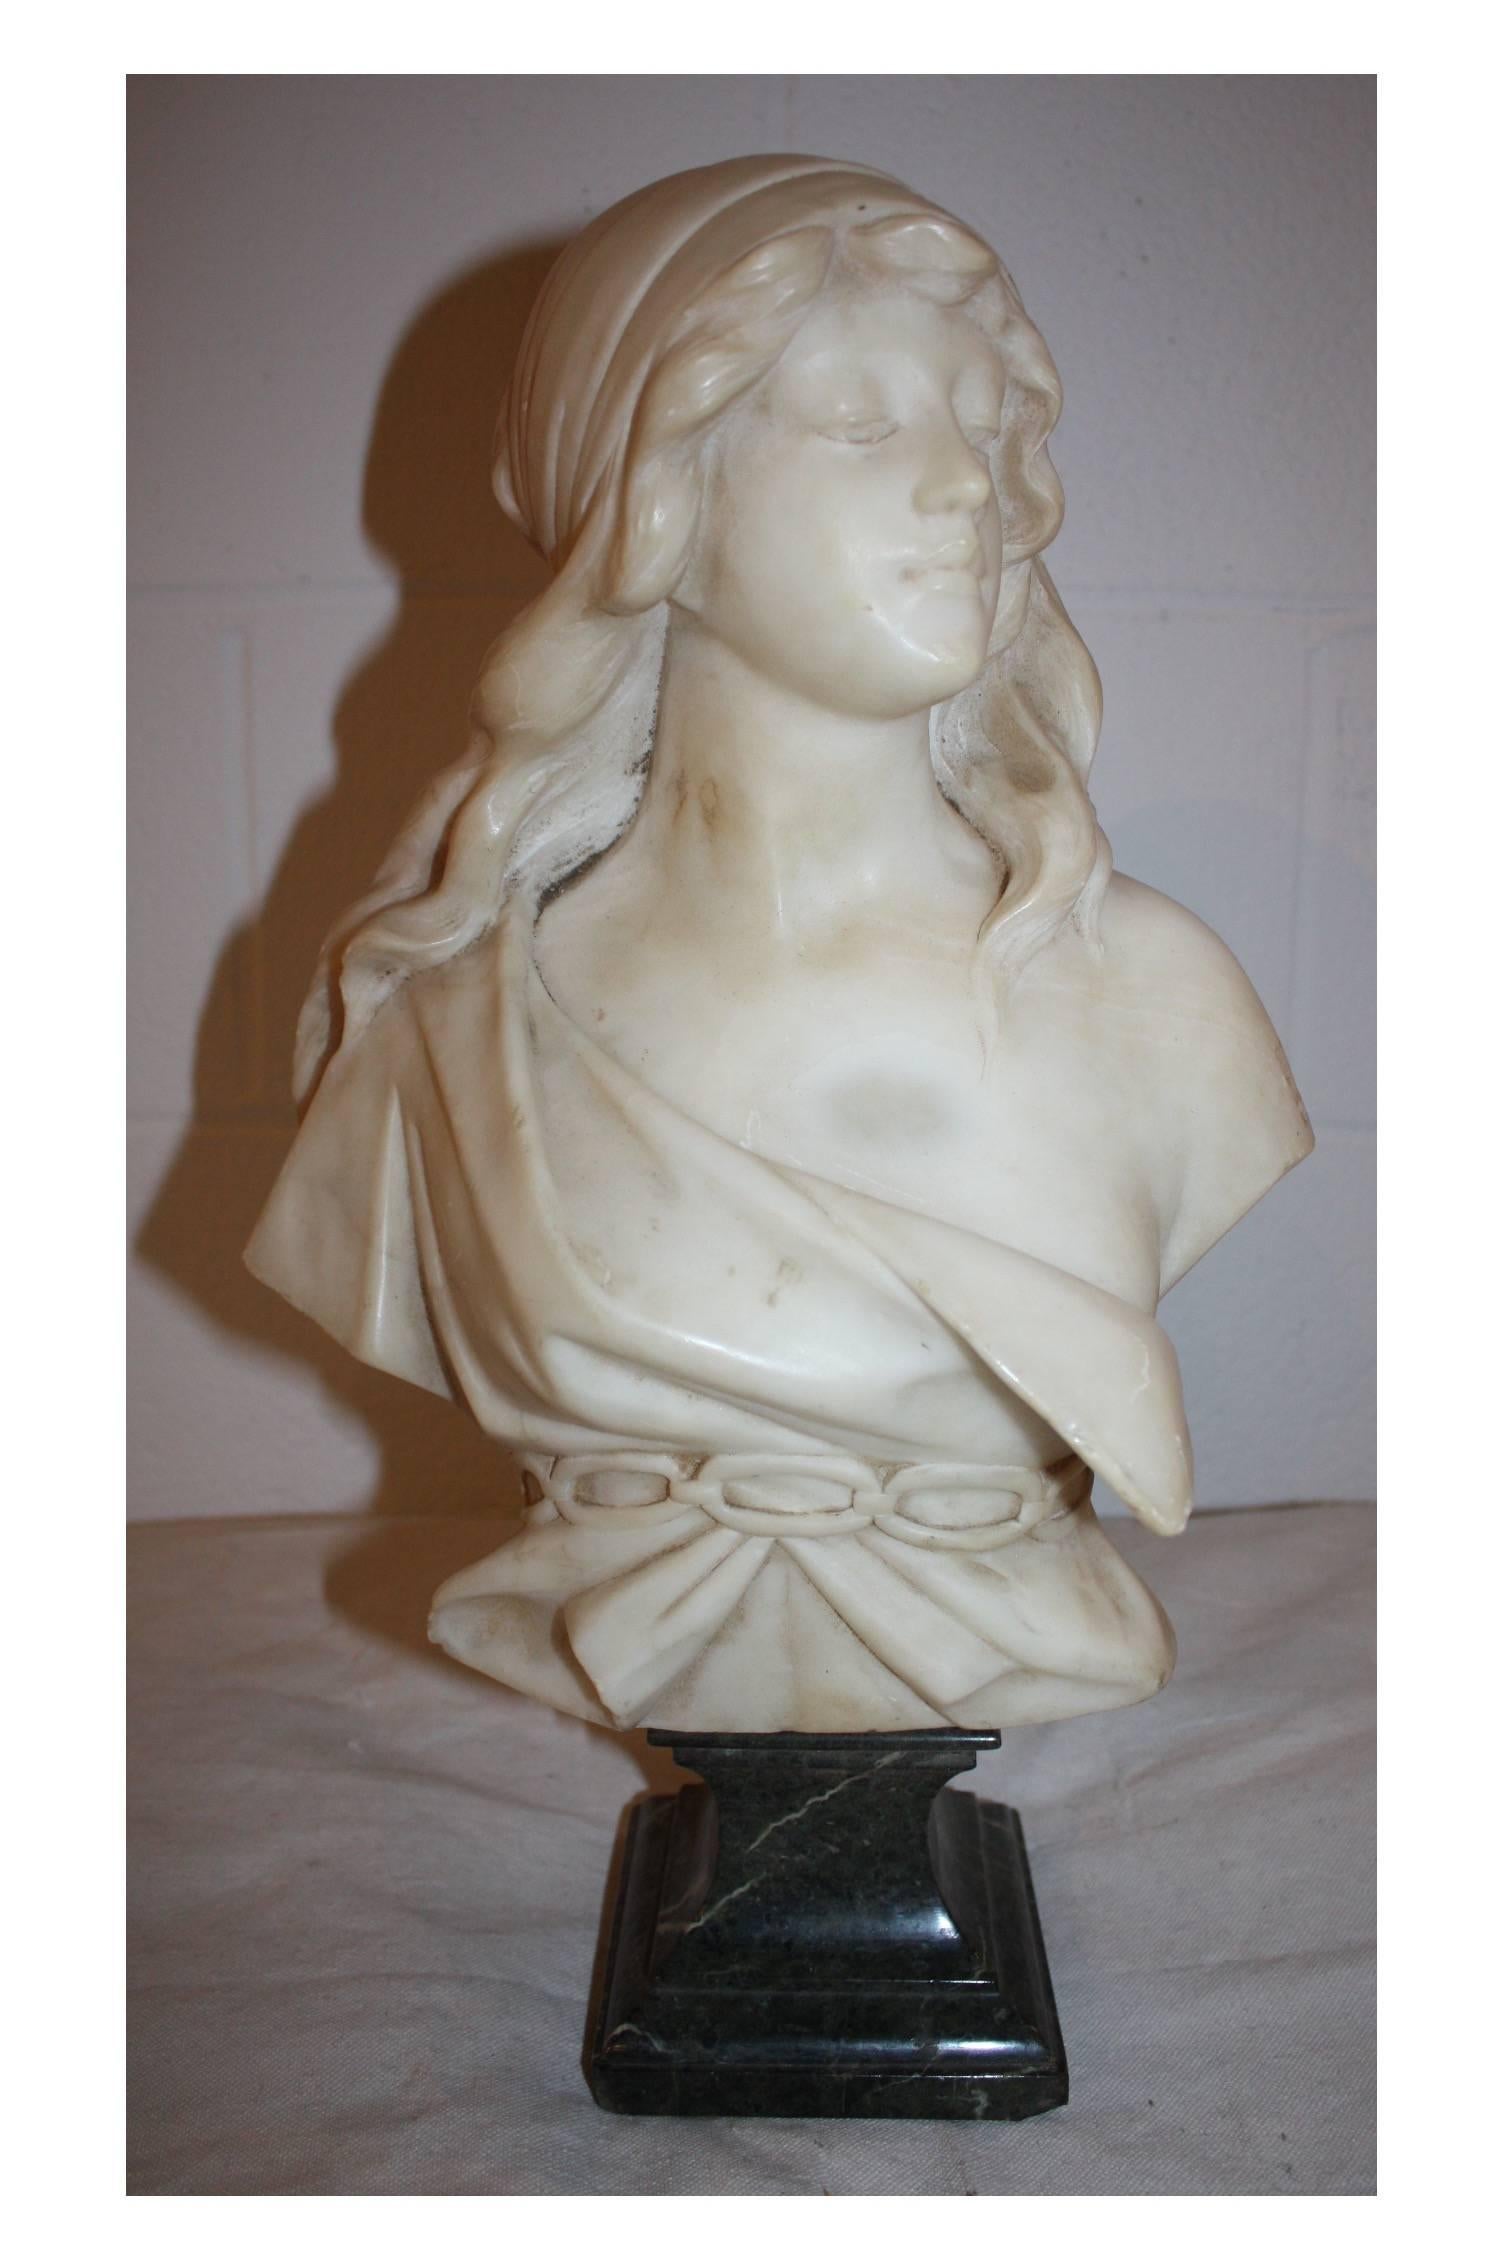 19th century French marble bust.